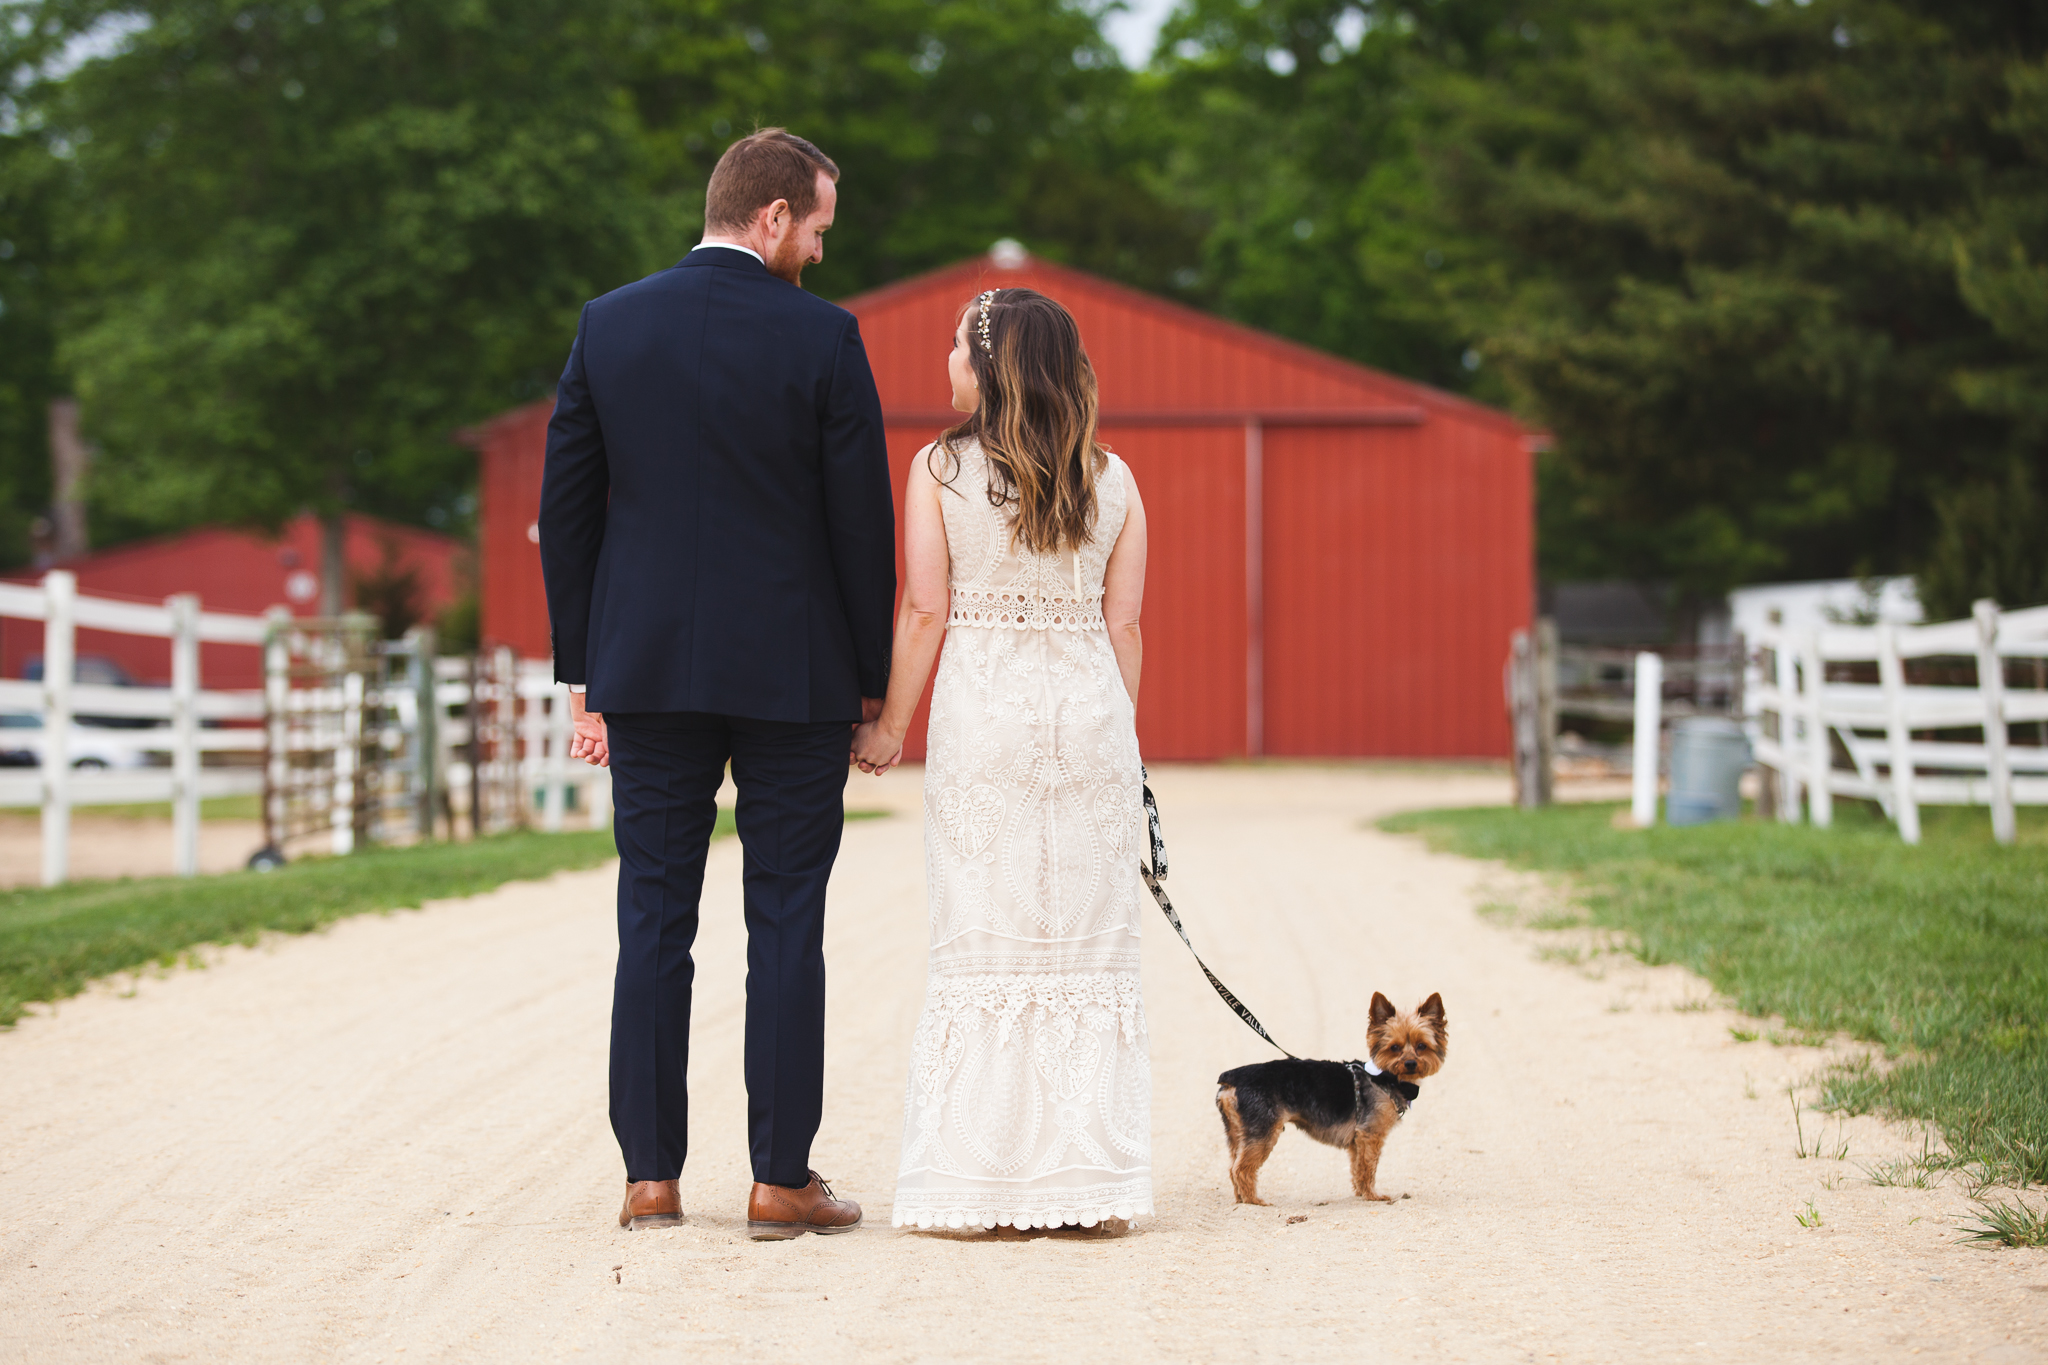  Family Farm Wedding in South Jersey Photography - Rustic Barn NJ - Millville, Vineland, Pittsgrove, Cape May, Ocean City - Creative Photographer, Candid, Joyful, Adventure. Elopement, Casual - Yorkie Puppy Pet Dog 